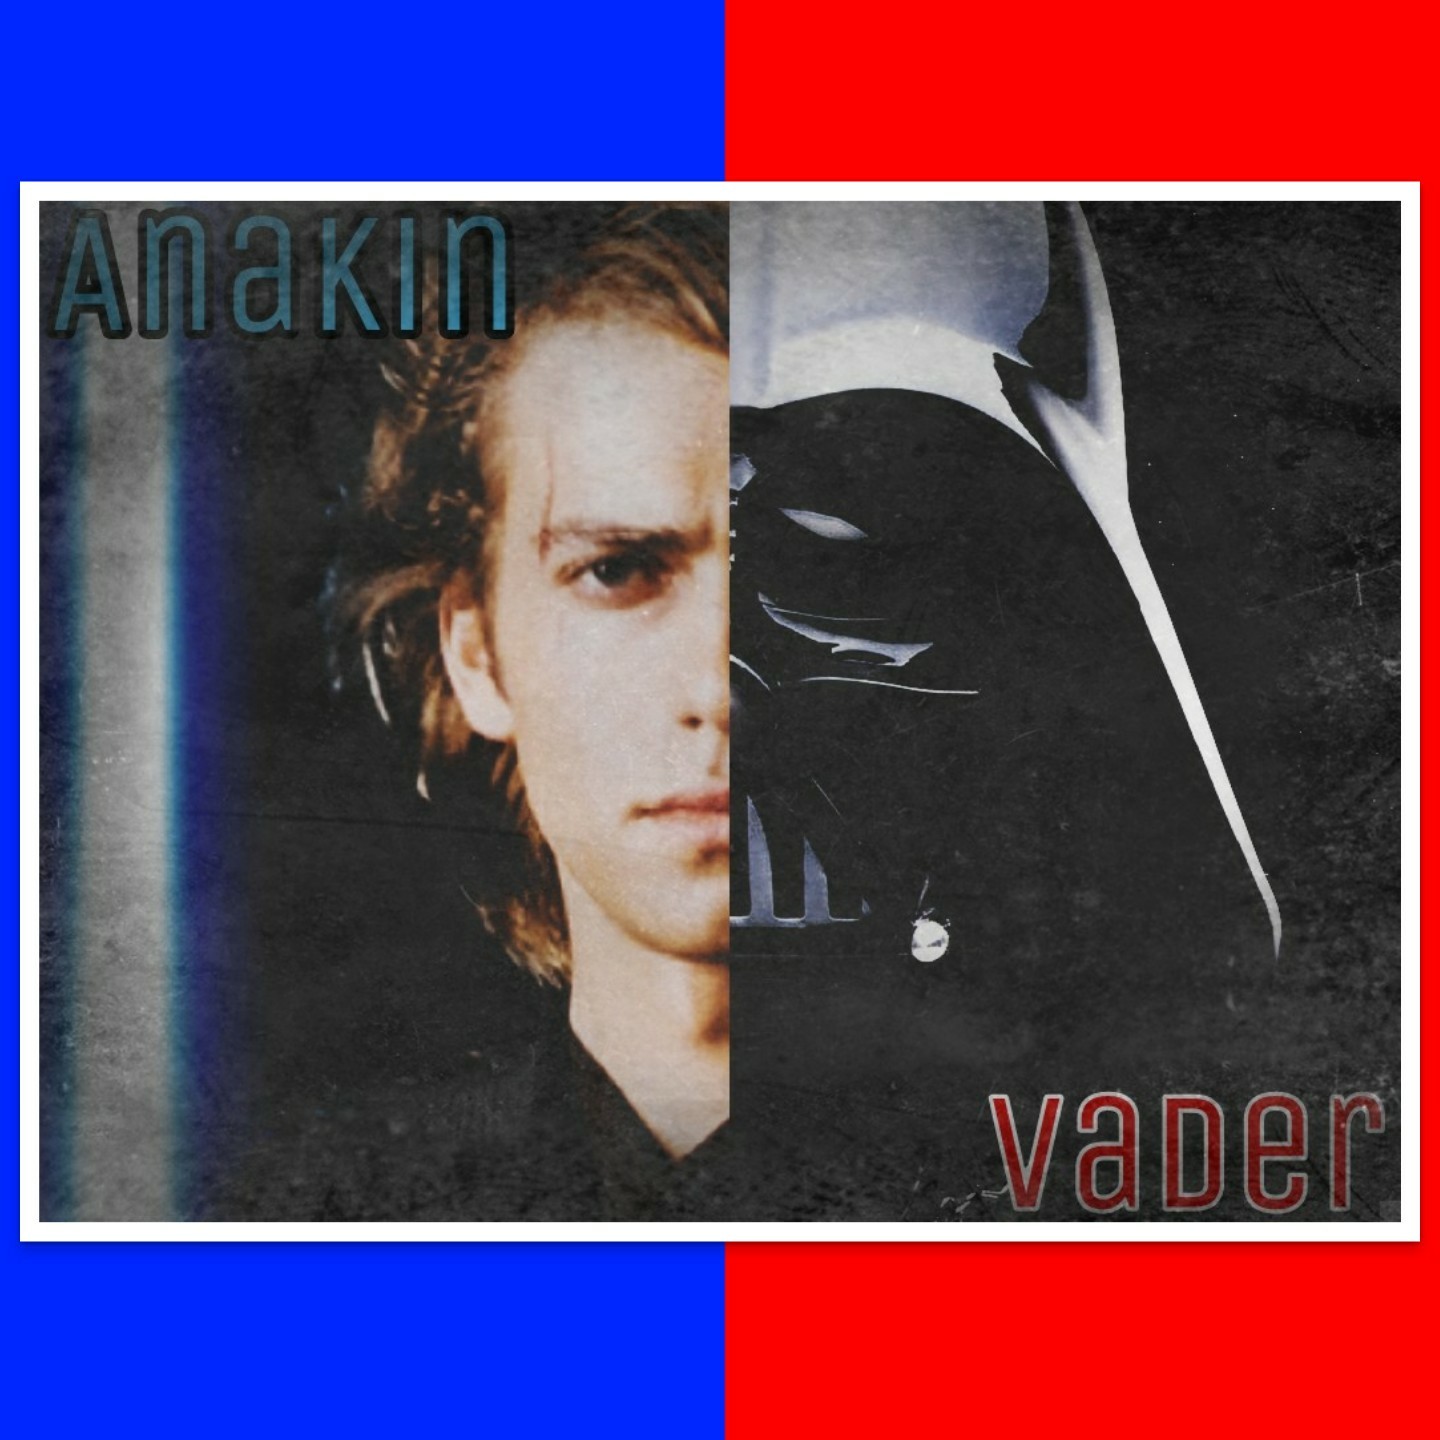 There is a new Star Wars YouTube video coming out on my channel tonight! Be on the look out!😂😃😀
#star wars #anakin #darth vader